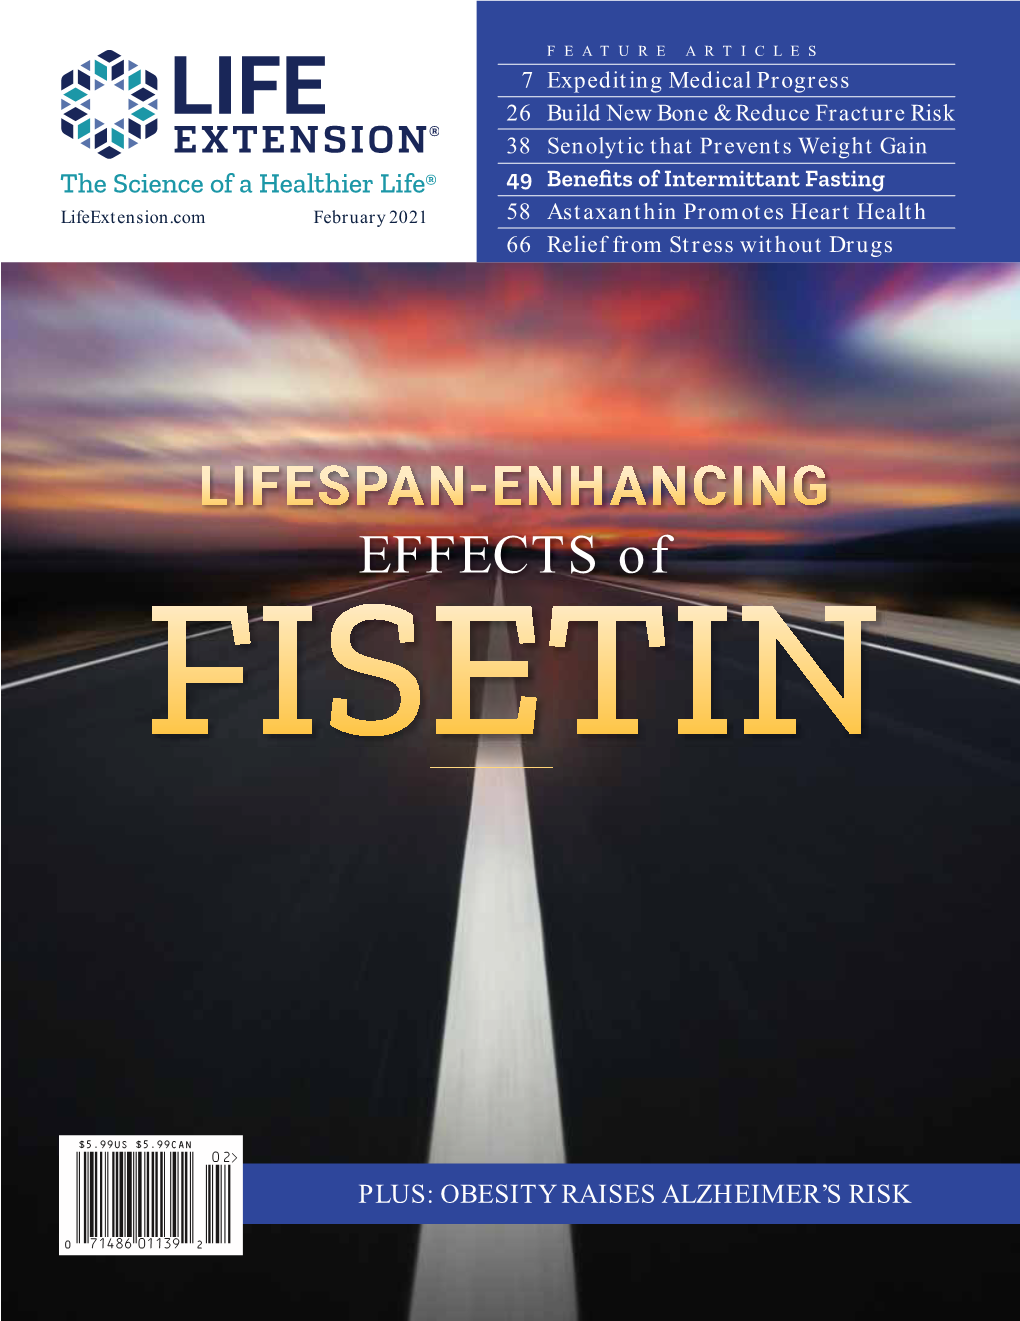 FISETIN: a SENOLYTIC THAT EXTENDS LIFESPAN Fisetin Has Demonstrated Robust Systemic Health Beneﬁts